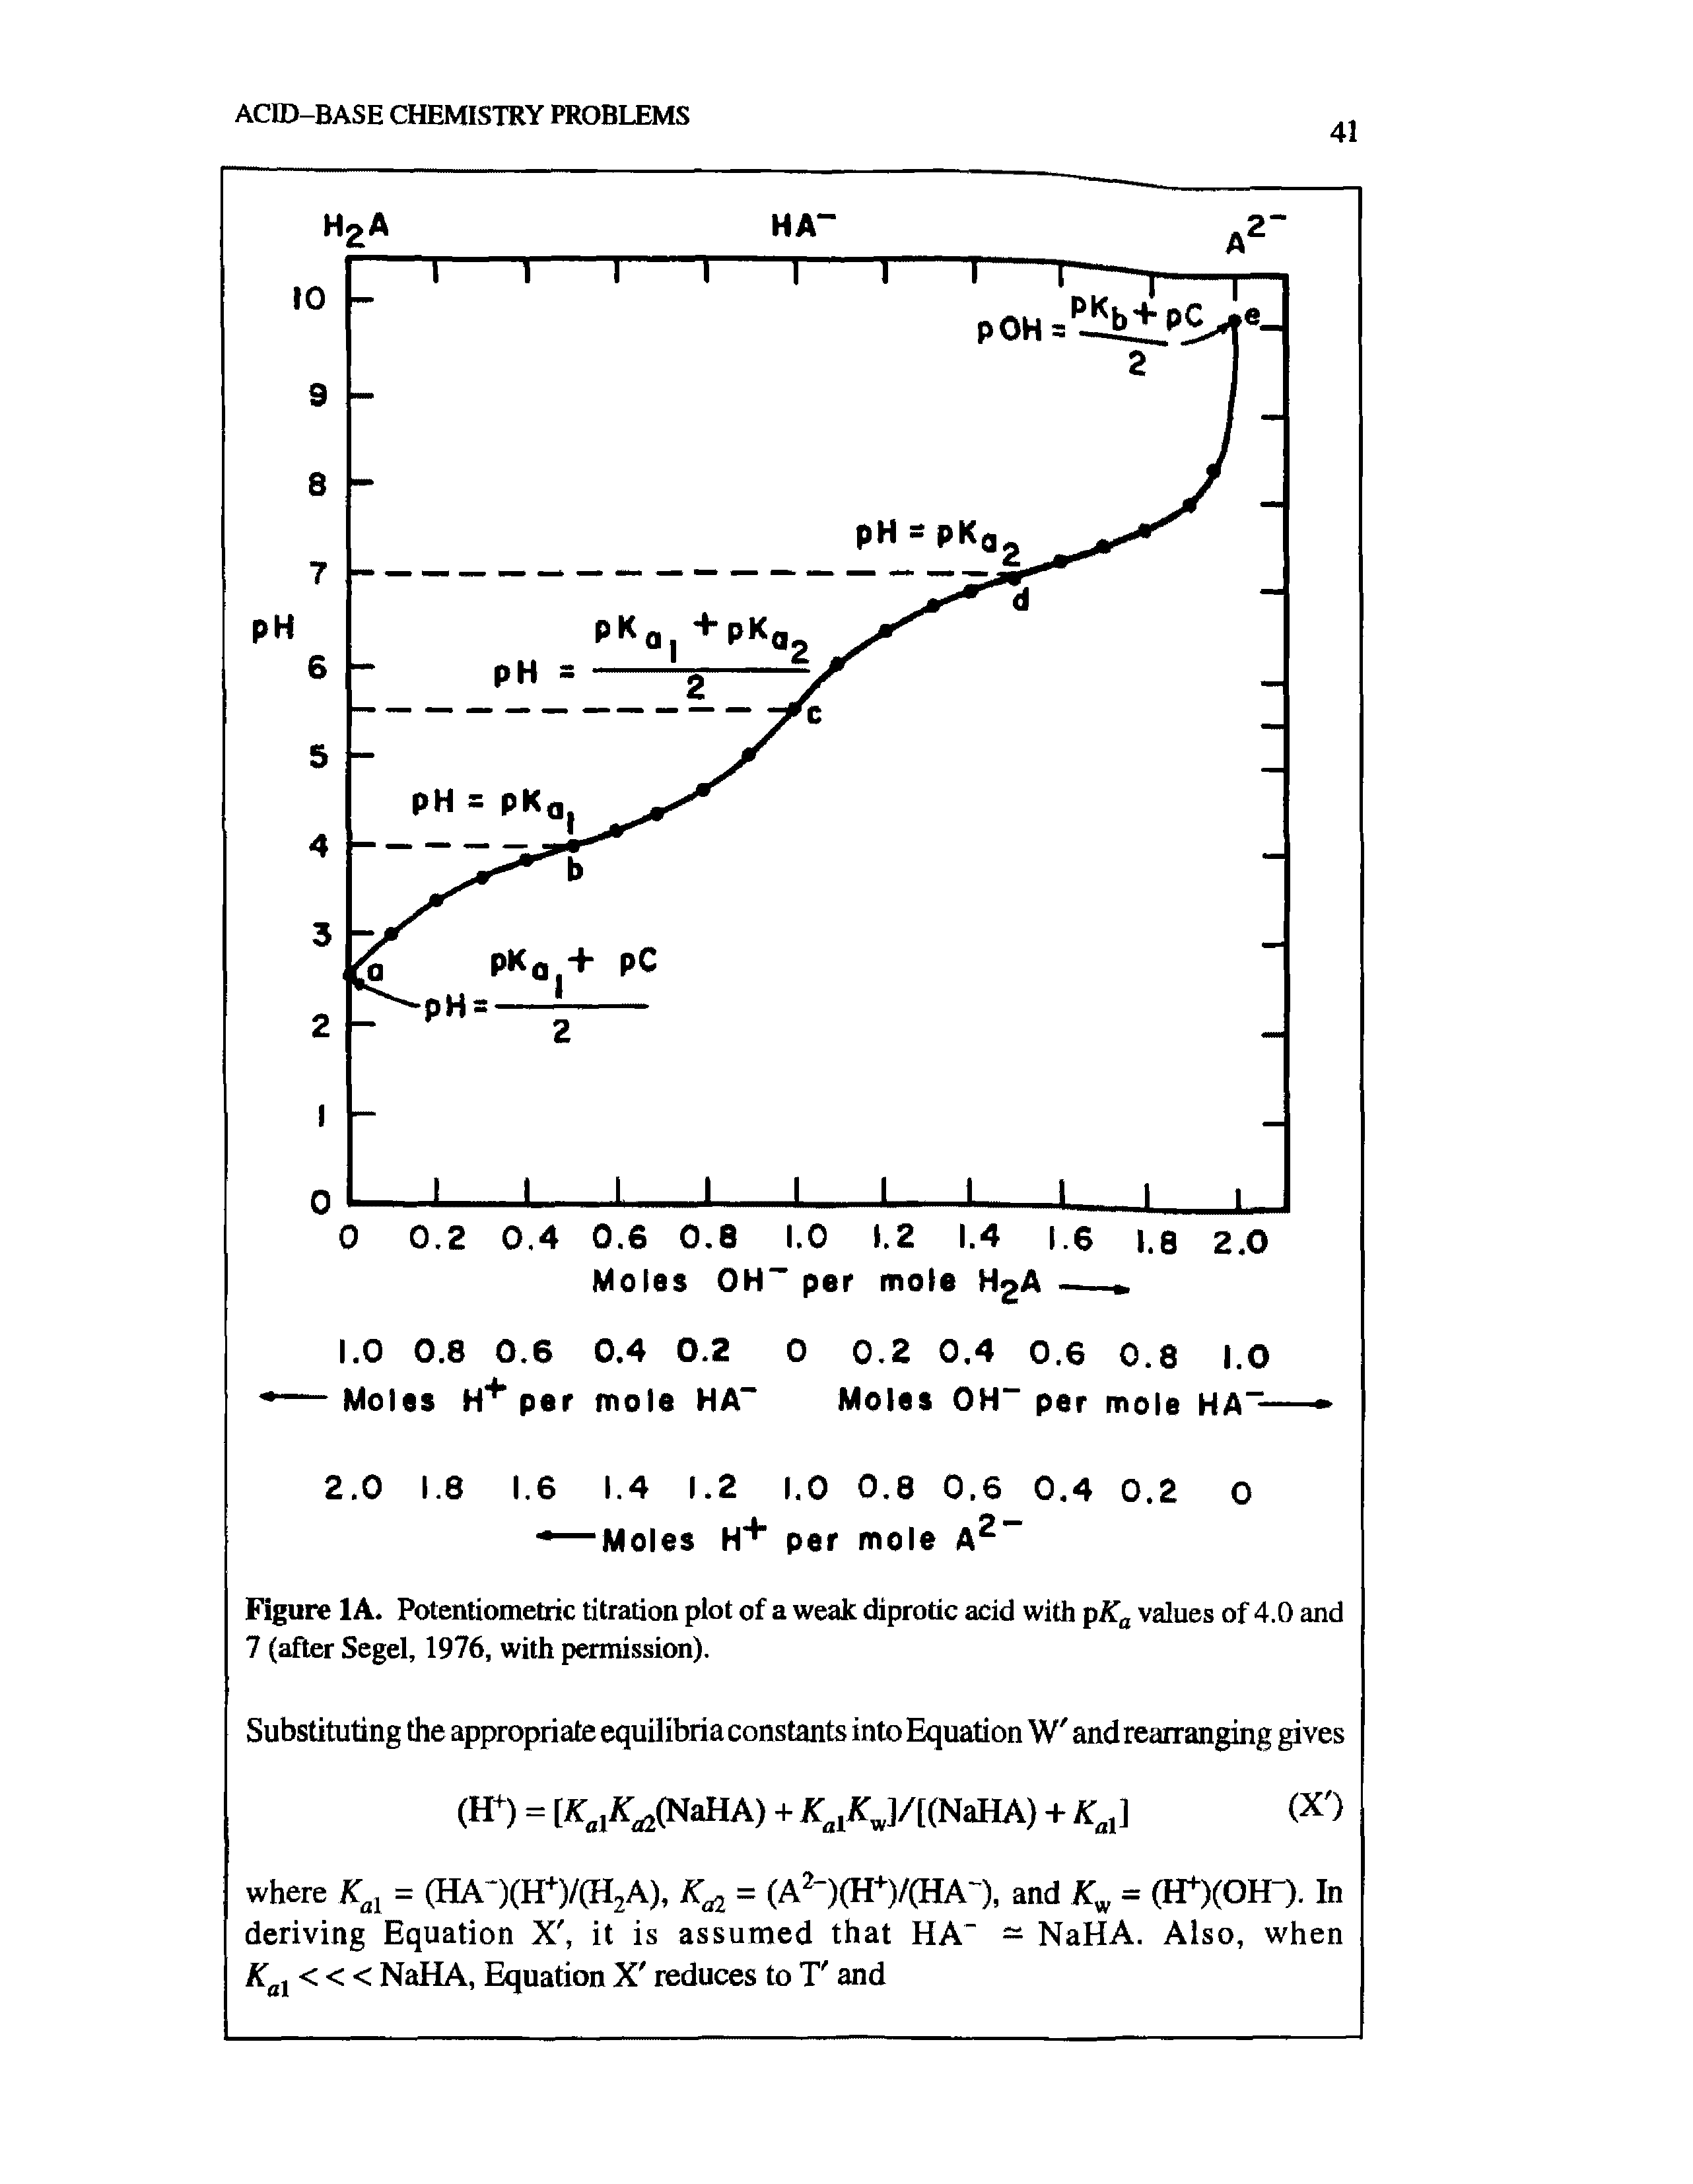 Figure 1A. Potentiometric titration plot of a weak diprotic acid with pKa values of 4.0 and 7 (after Segel, 1976, with permission).